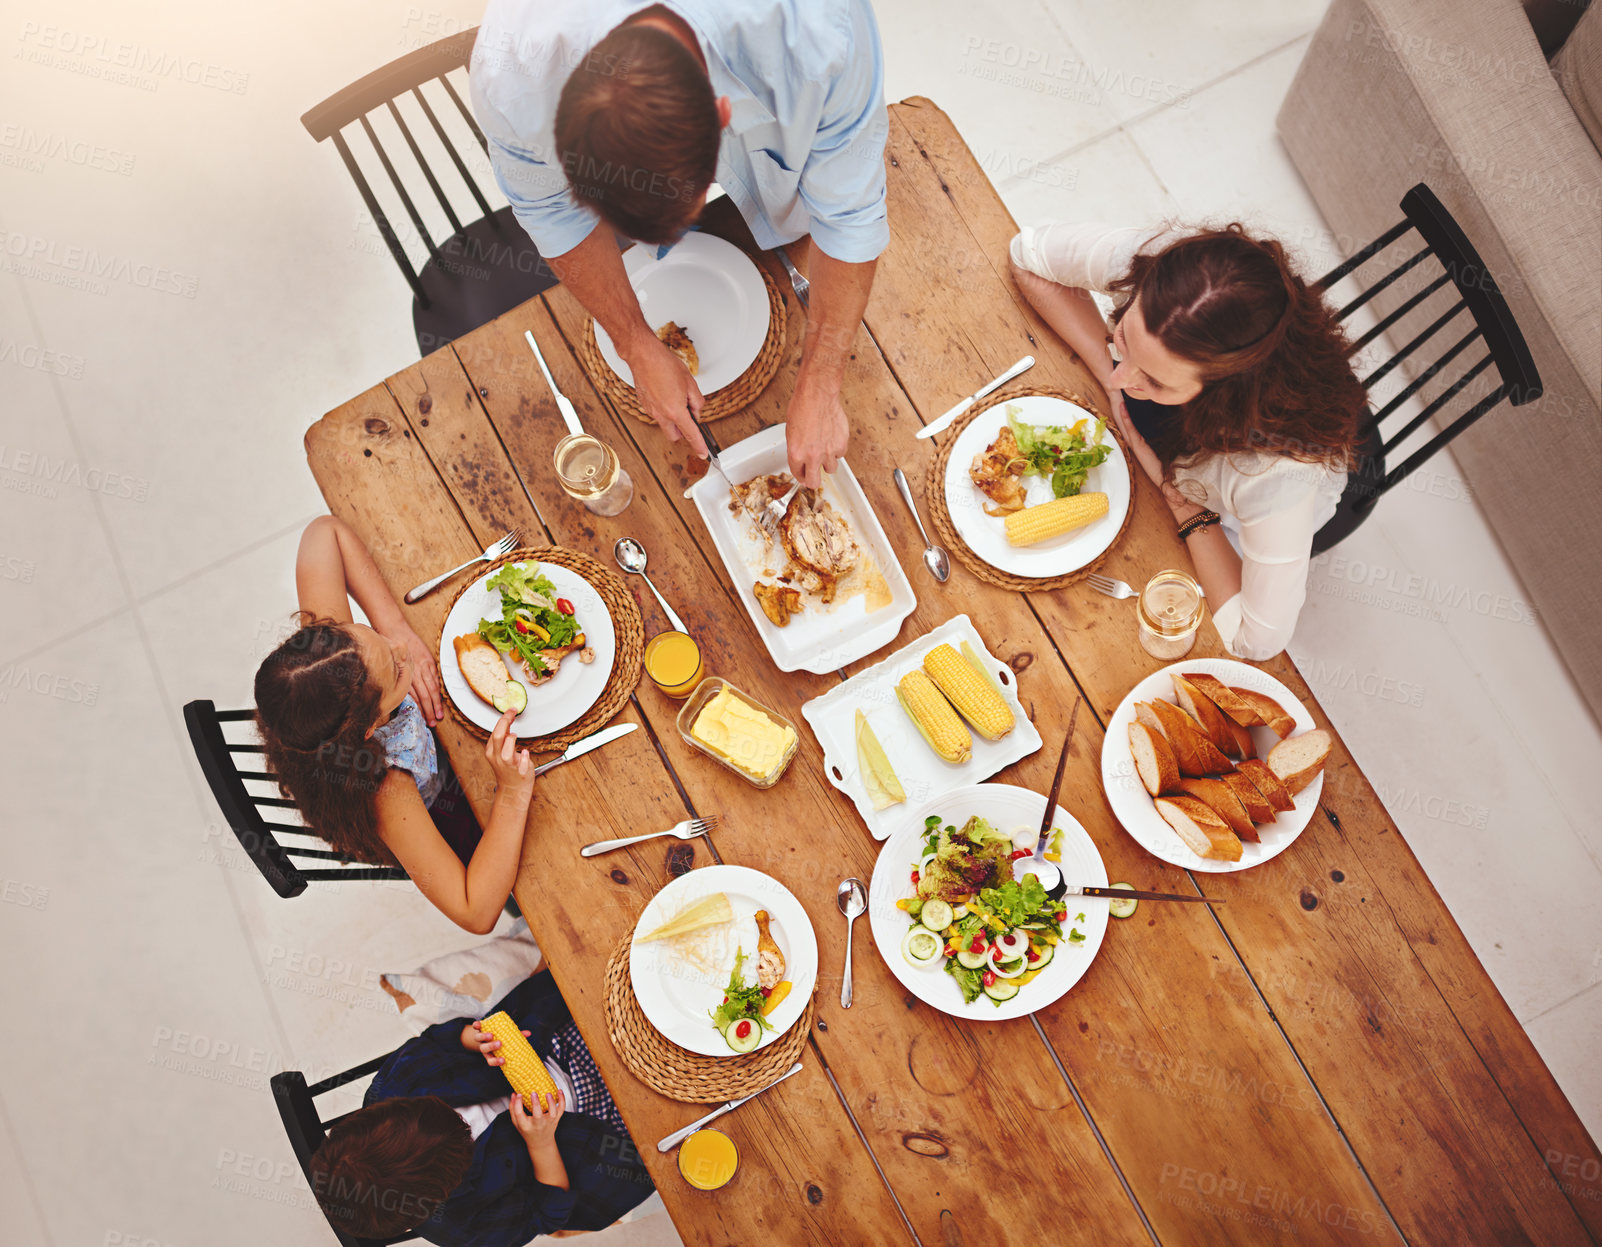 Buy stock photo High angle shot of a family eating  homemade food around the dining room table